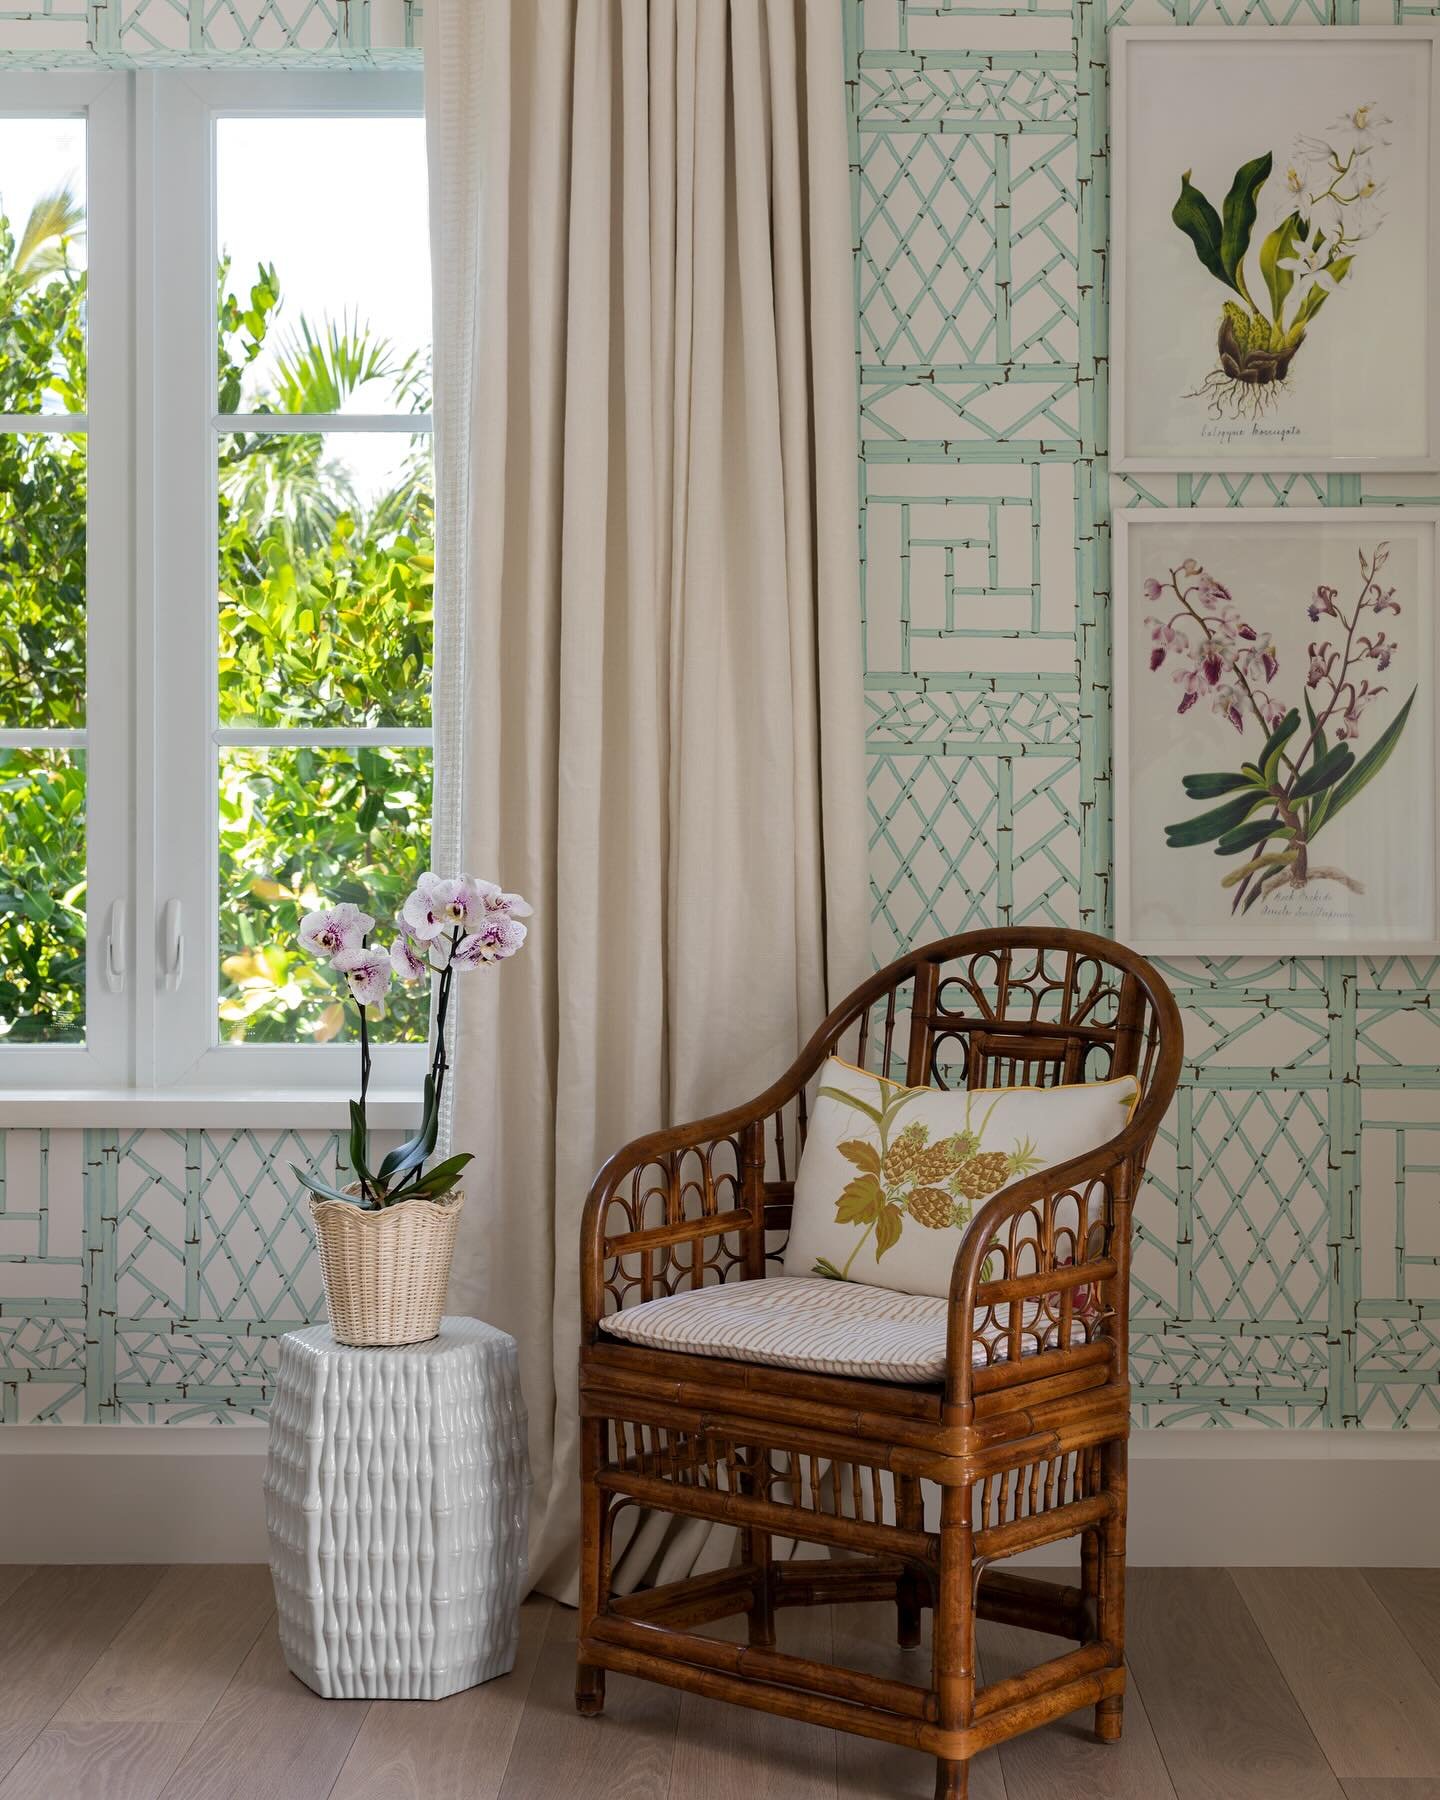 Tropical state of mind. Our #PCFloridaFantasy secondary bedroom boasts iconic bamboo trellis wall coverings with bright floral motifs throughout the room. The result is a true bedroom oasis.

Stylist: @Cate.Ragan.Styling
Photographer: @AimeeMazzenga
